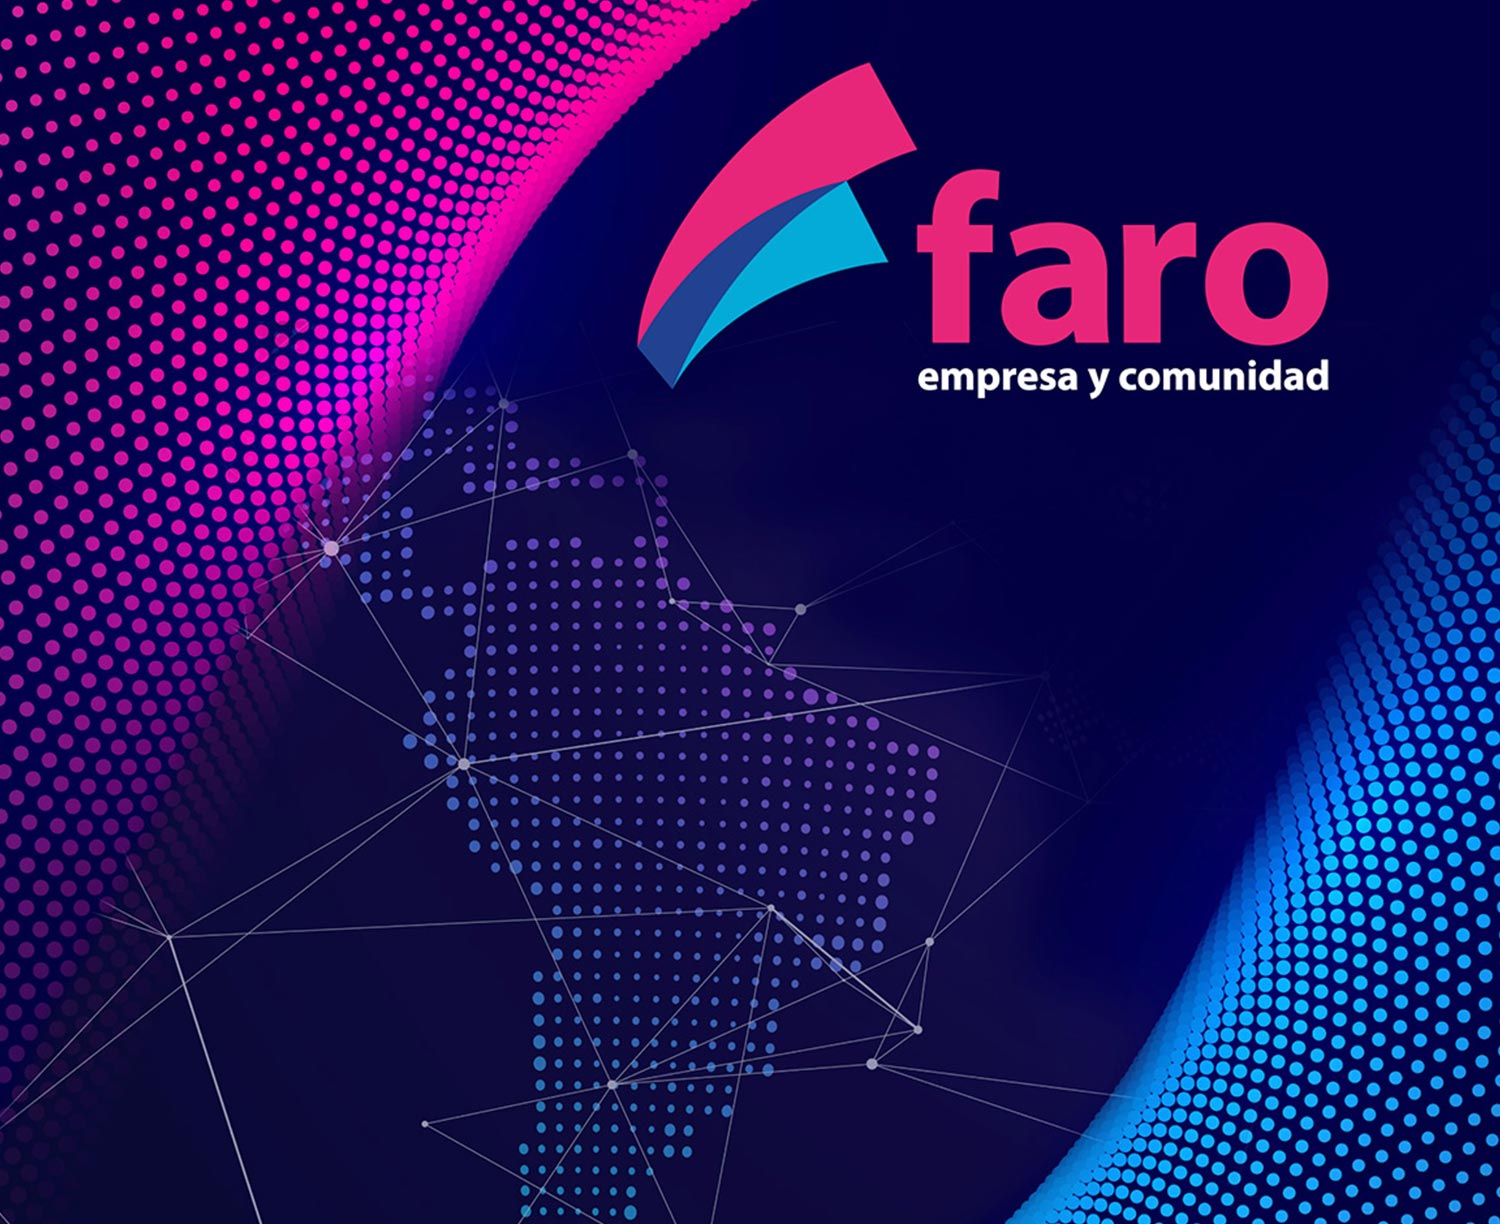 Cover page of a publication of the results of Faro, a self-assessment tool. The text says “faro, empresa y comunidad.